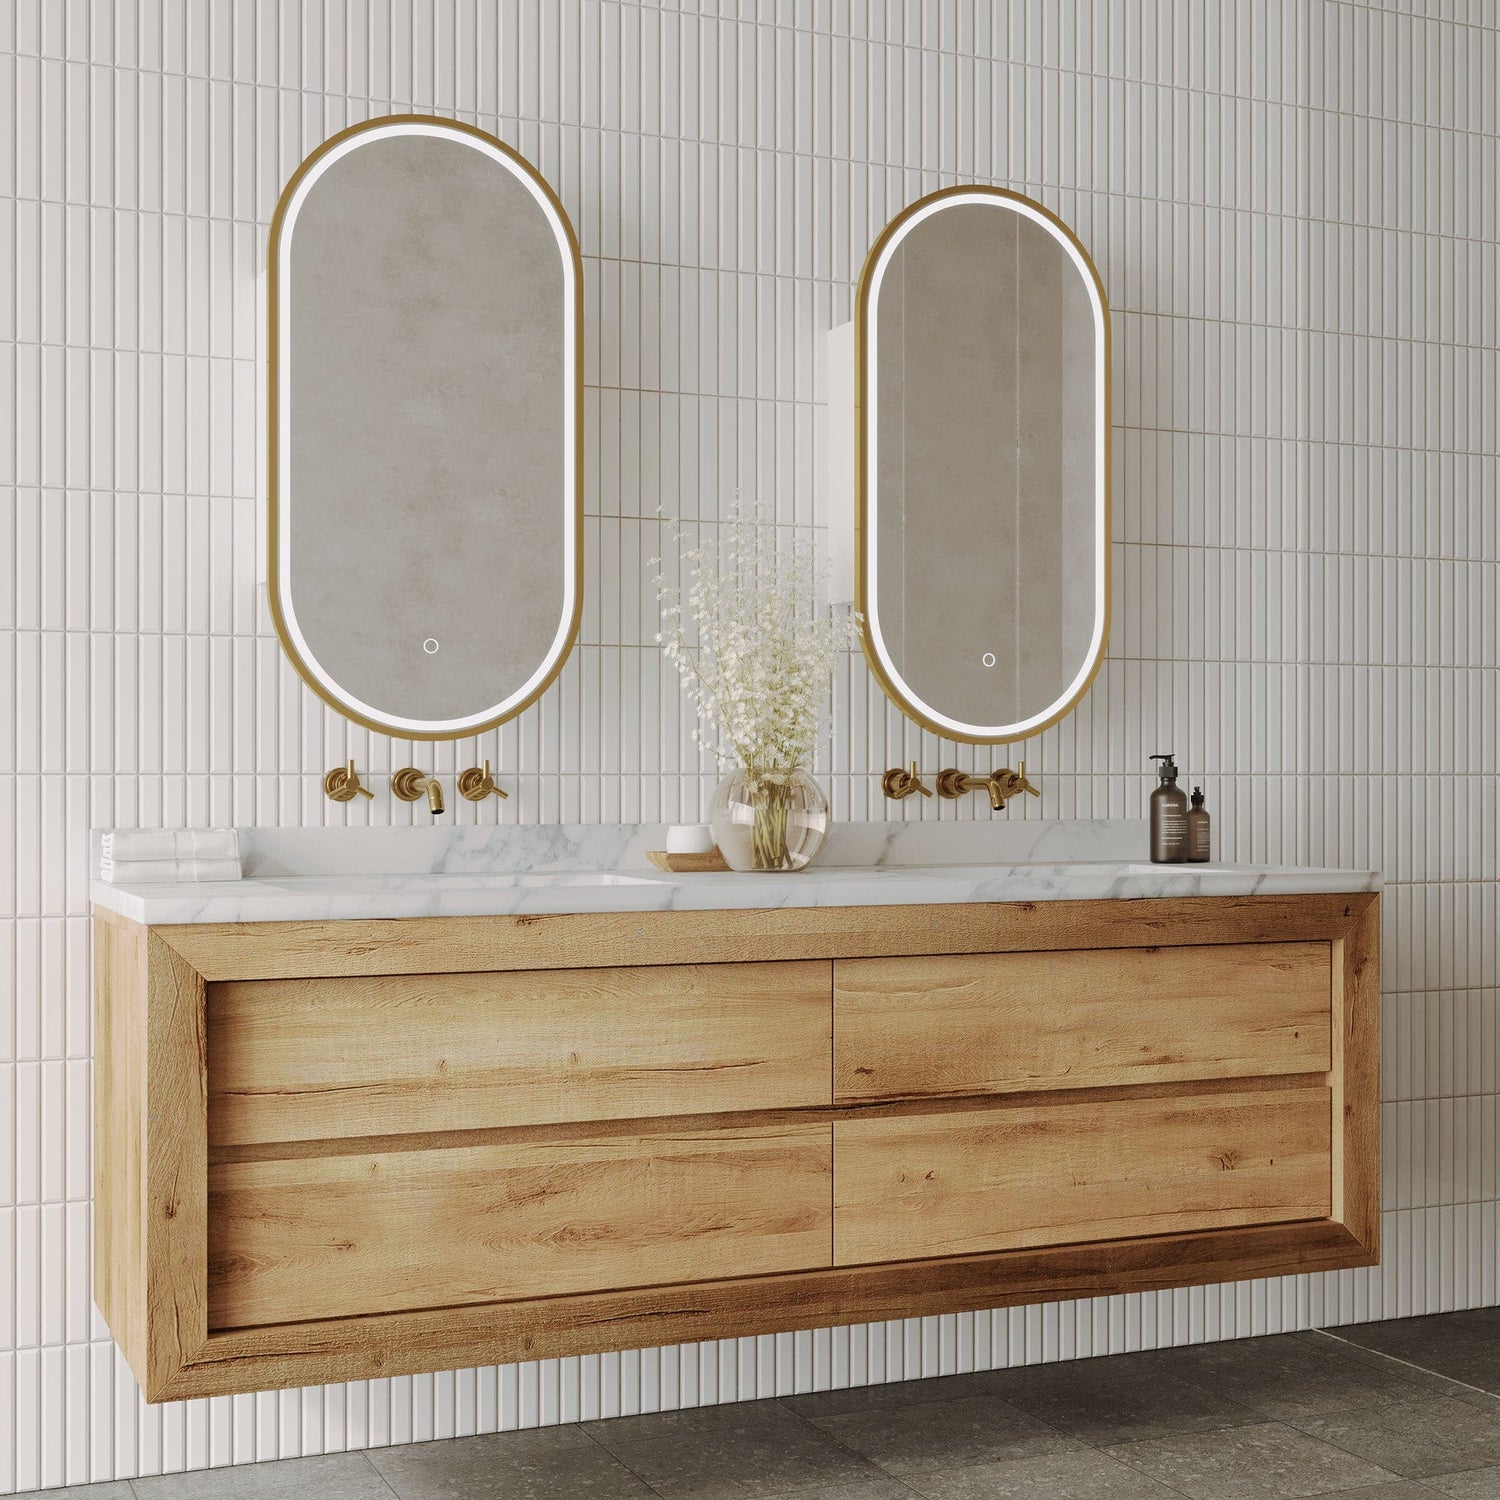 Remer Remer Capsule LED Smart Mirror Shaving Cabinet 450 x 150cm Brushed Brass CR45D-BB